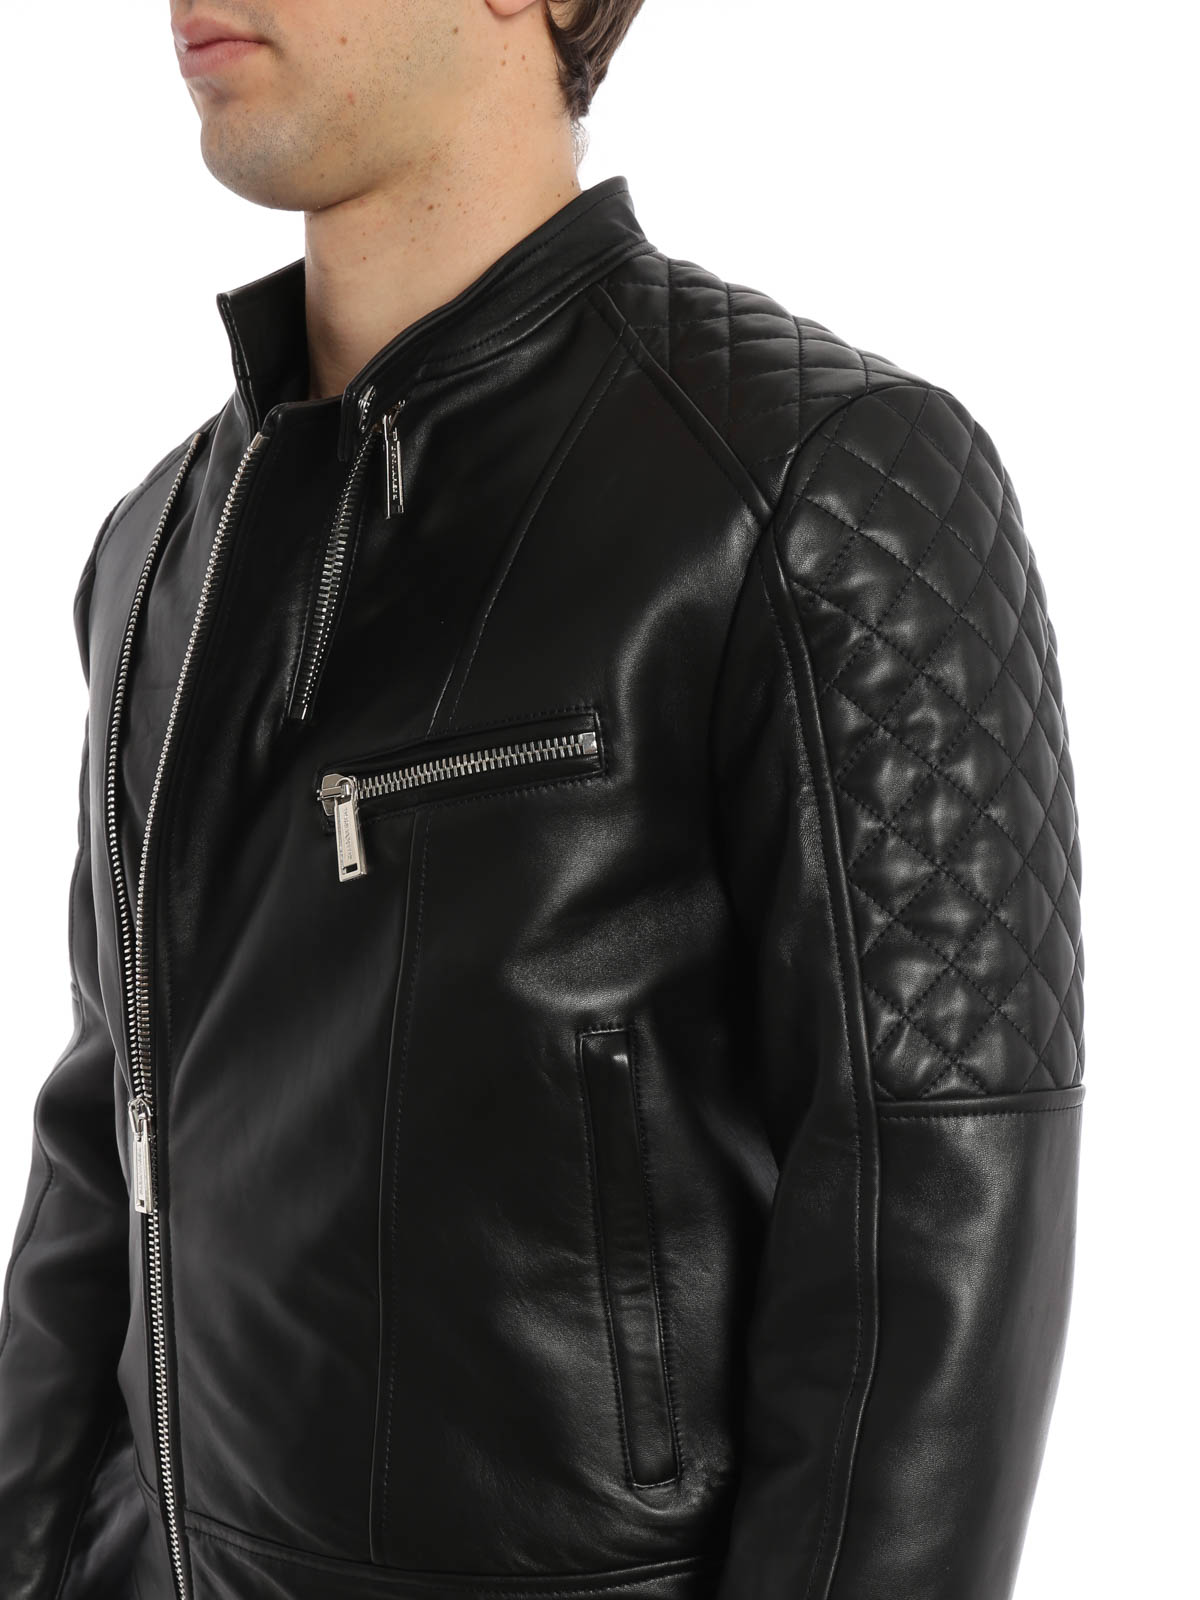 dsquared men's leather jacket motorcycle